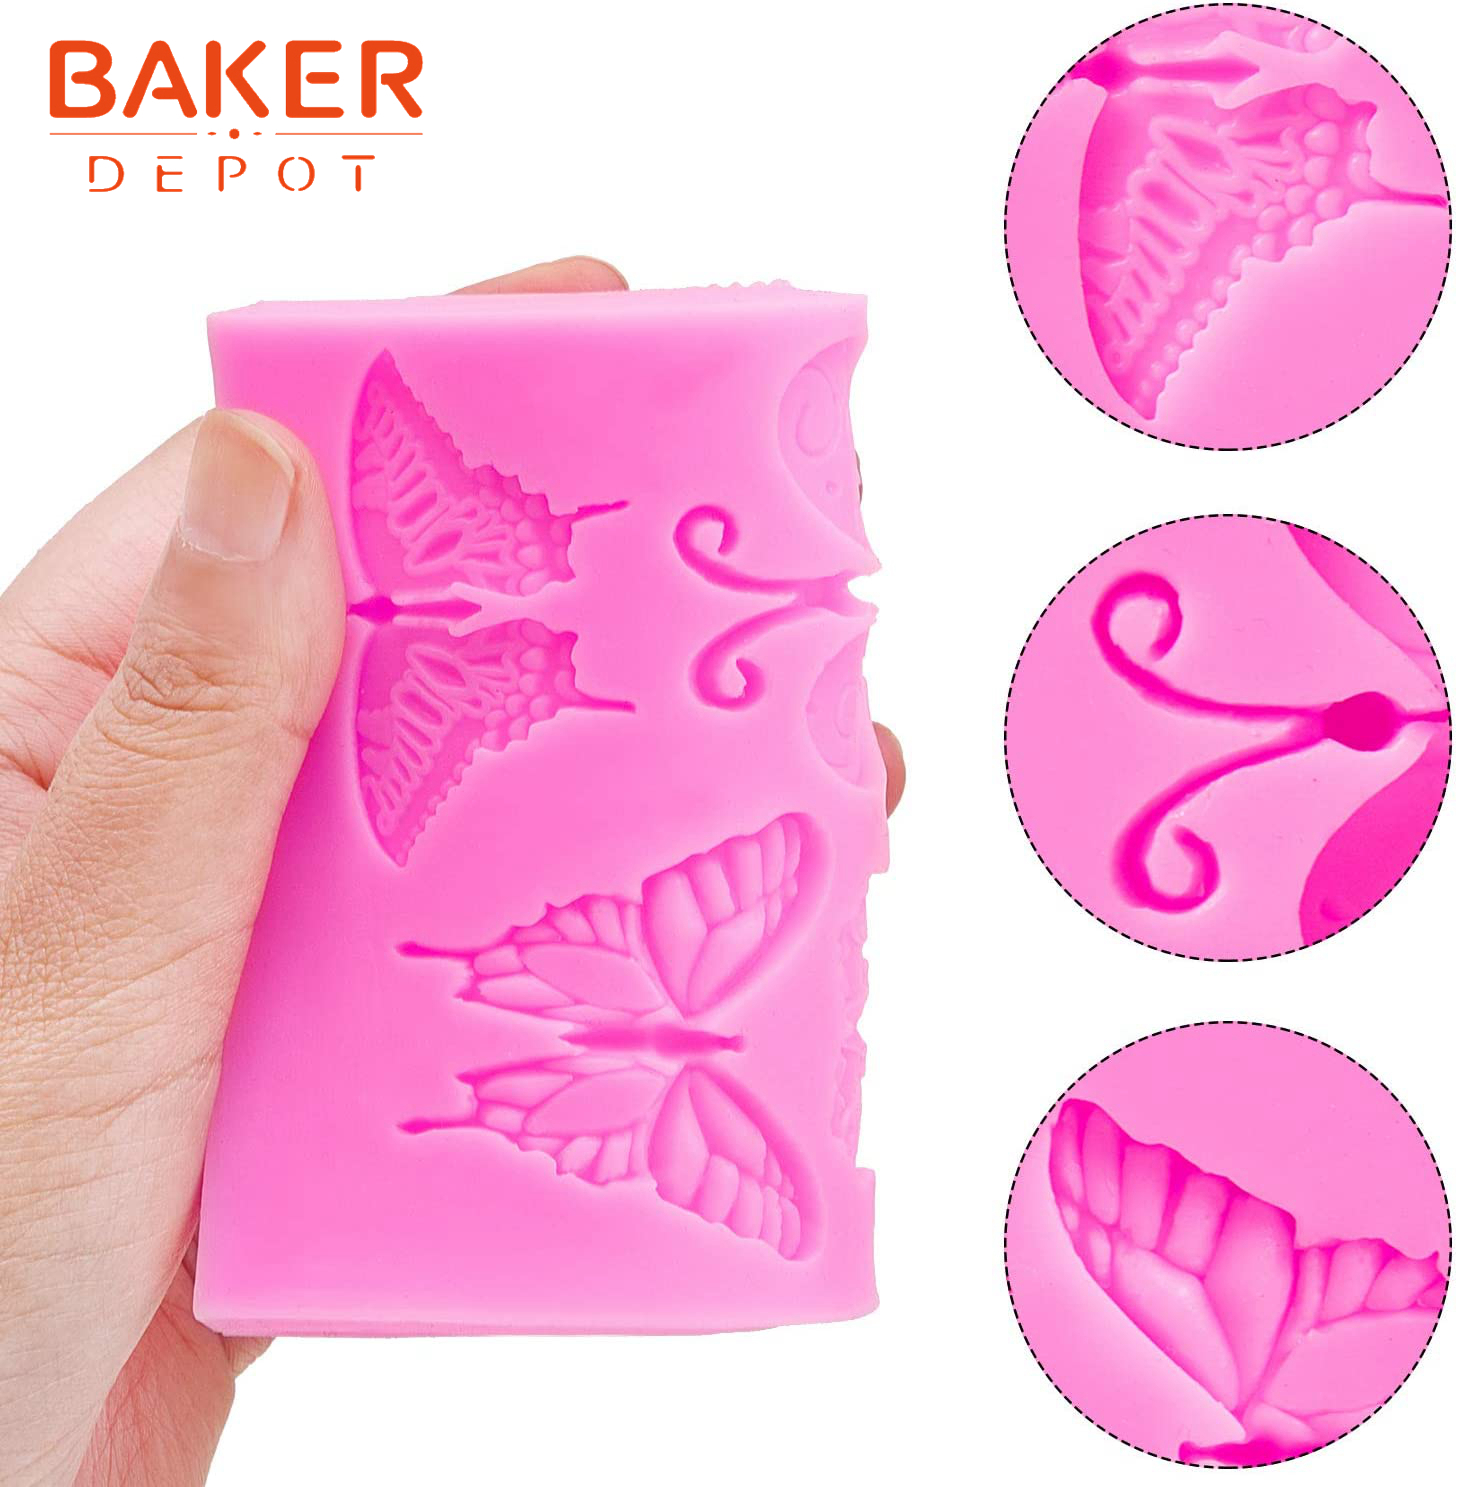 Crystalyhj Butterfly Fondant Mold Silicone Premium Candy Sugar Silicone Molds for Wedding Cake Cupcake Baby Shower Birthday Decorations 6 Cavities